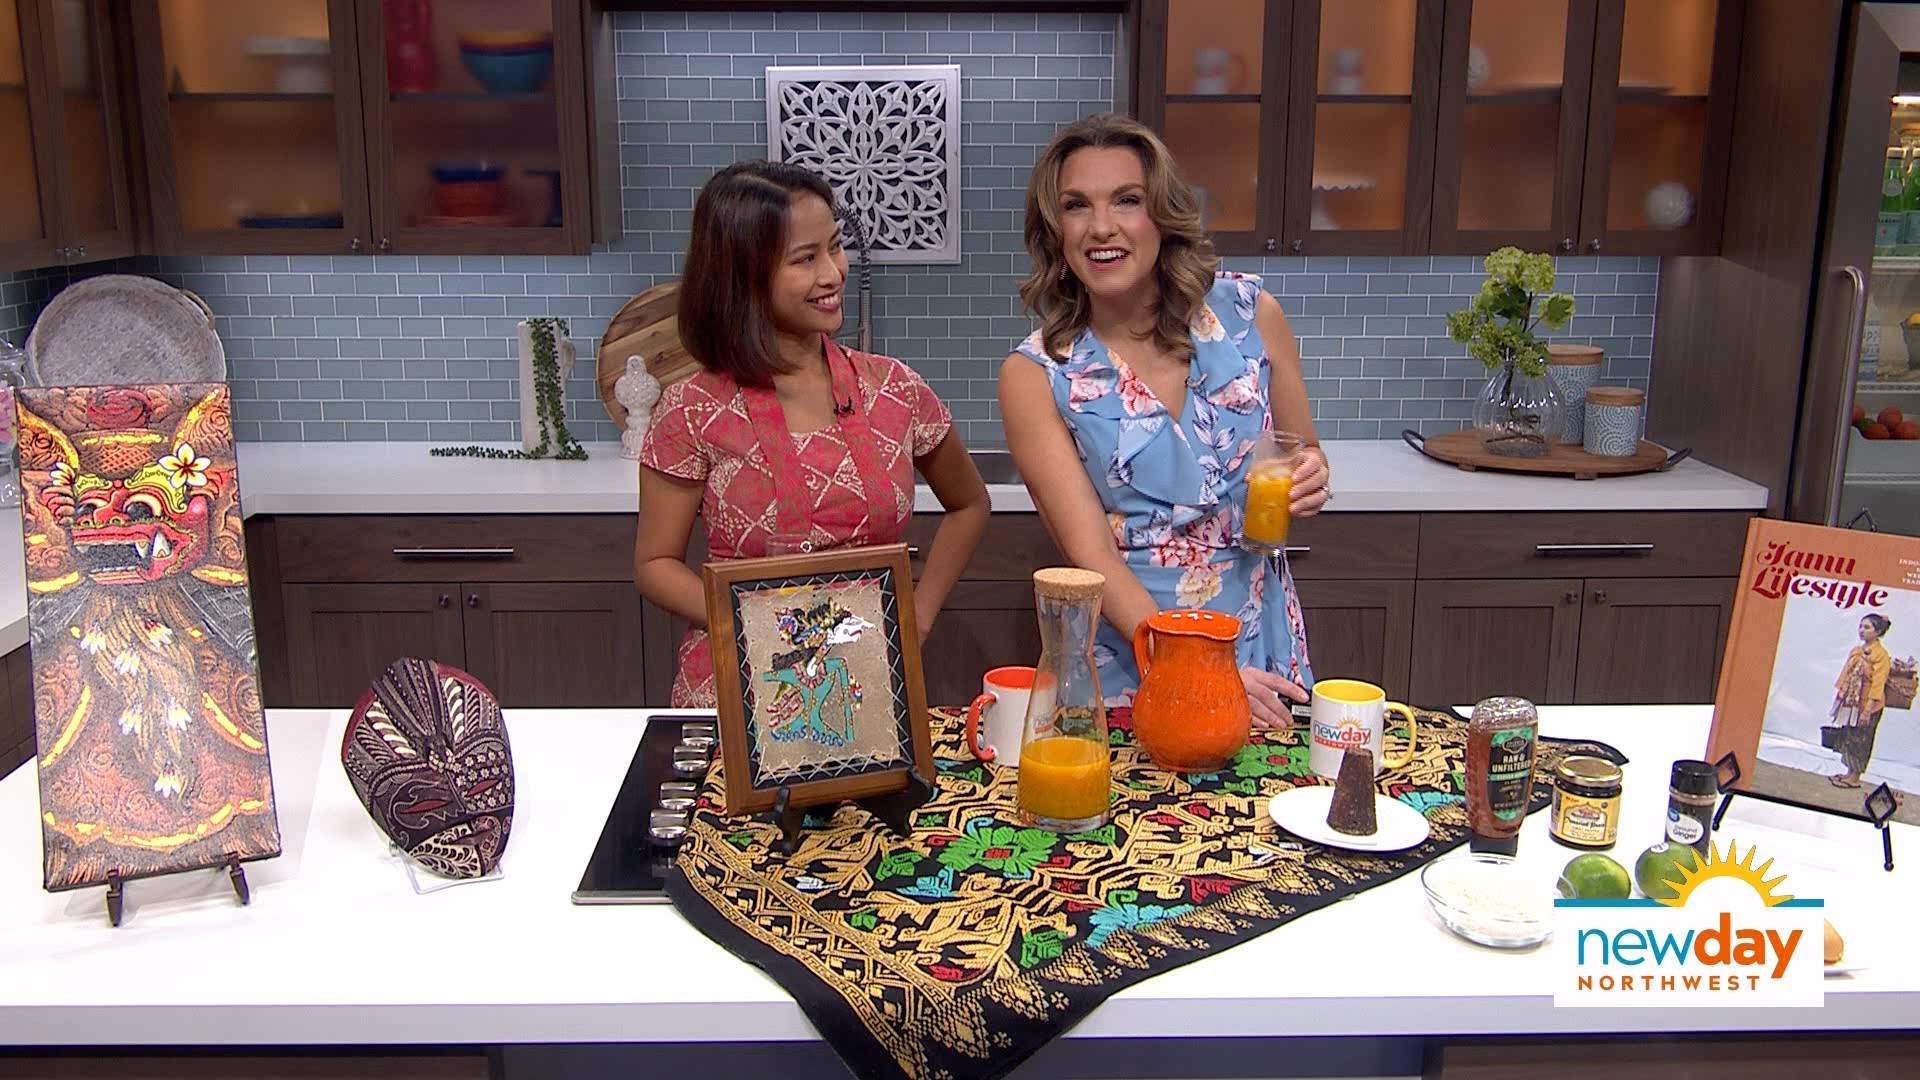 New Day NW editor Gloria Angelin joins Amity to try an Indonesian wellness drink. #newdaynw